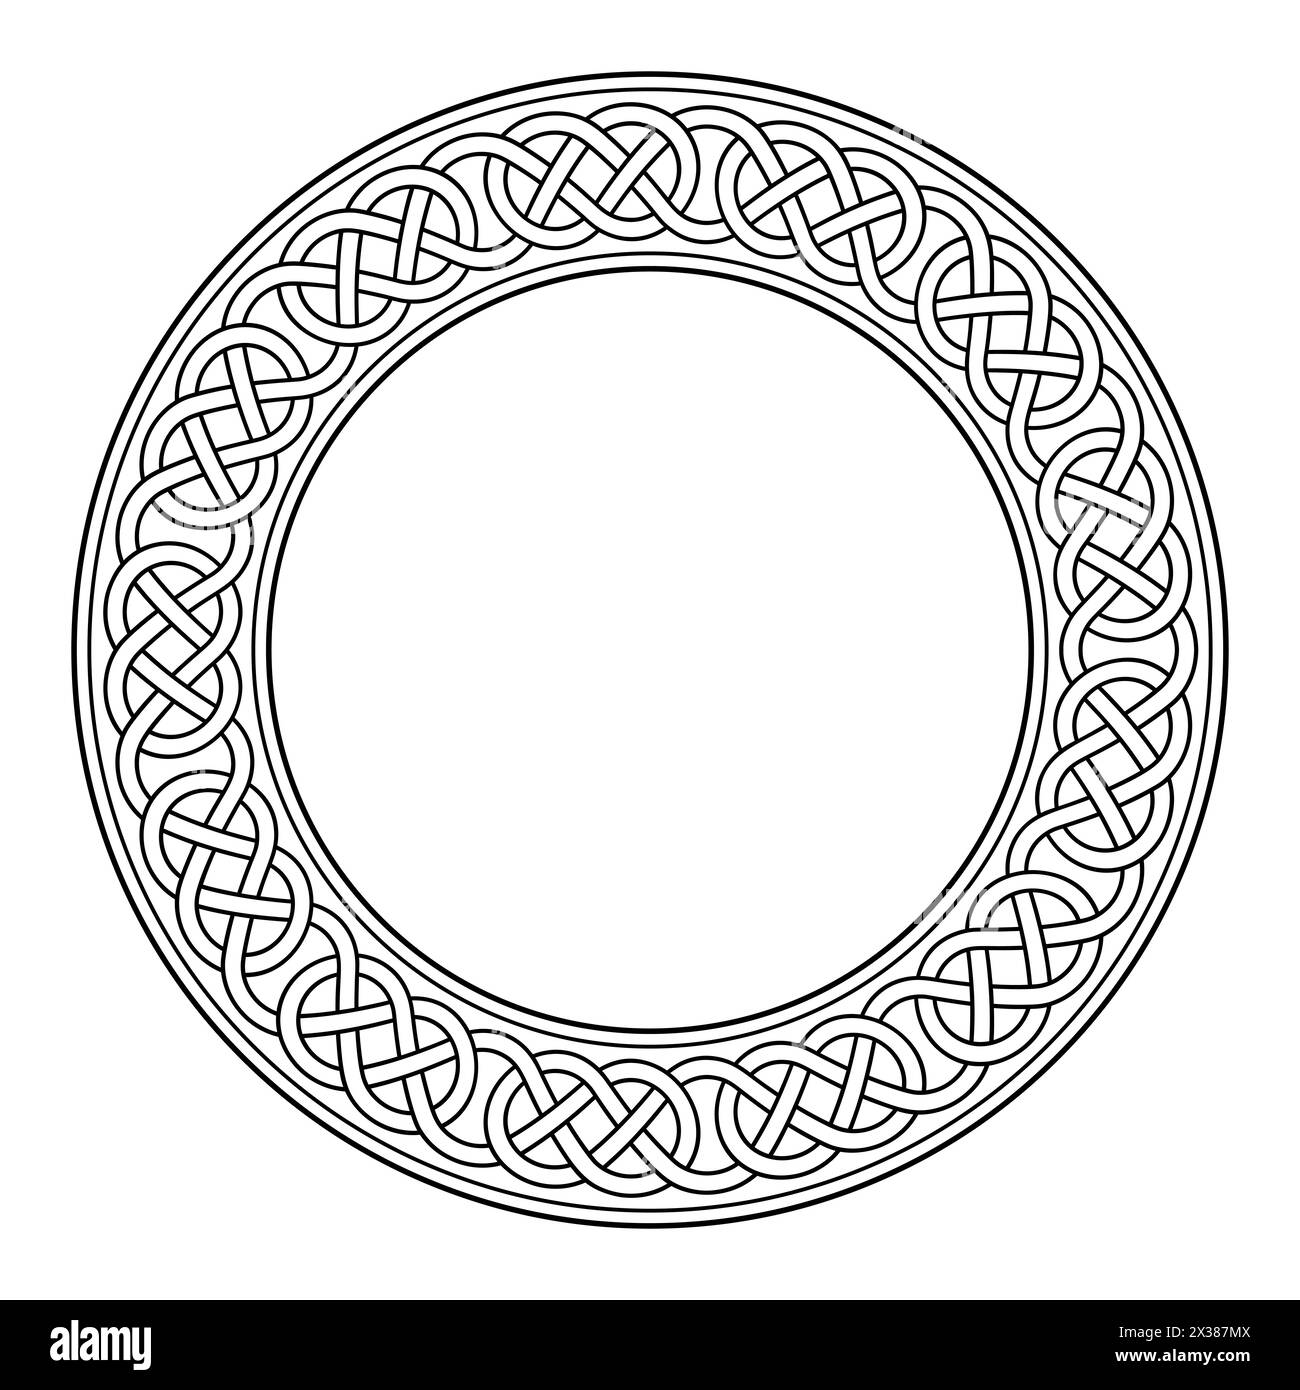 Circle frame with Celtic loop border knotwork. Decorative border with a pattern in typical Celtic style. Intertwined lines forming sling knots. Stock Photo